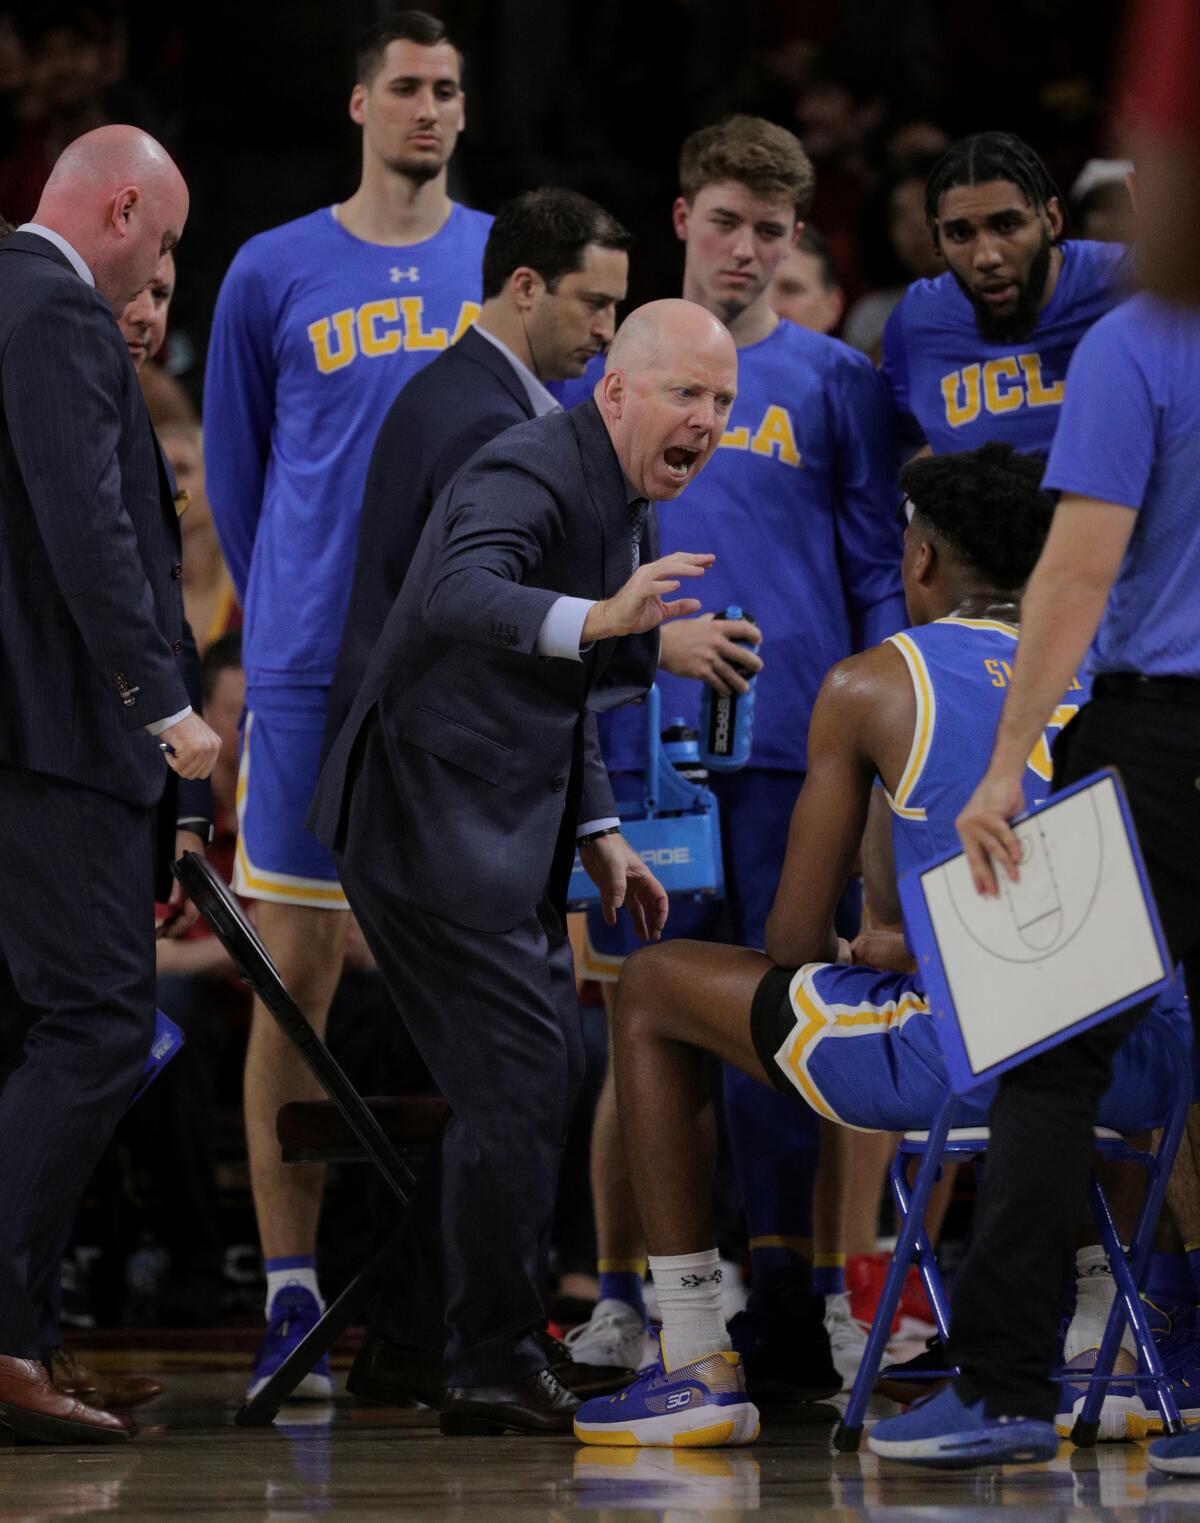 UCLA coach Mick Cronin has words for his players after defensive lapses against USC in the second half at Galen Center on Saturday.